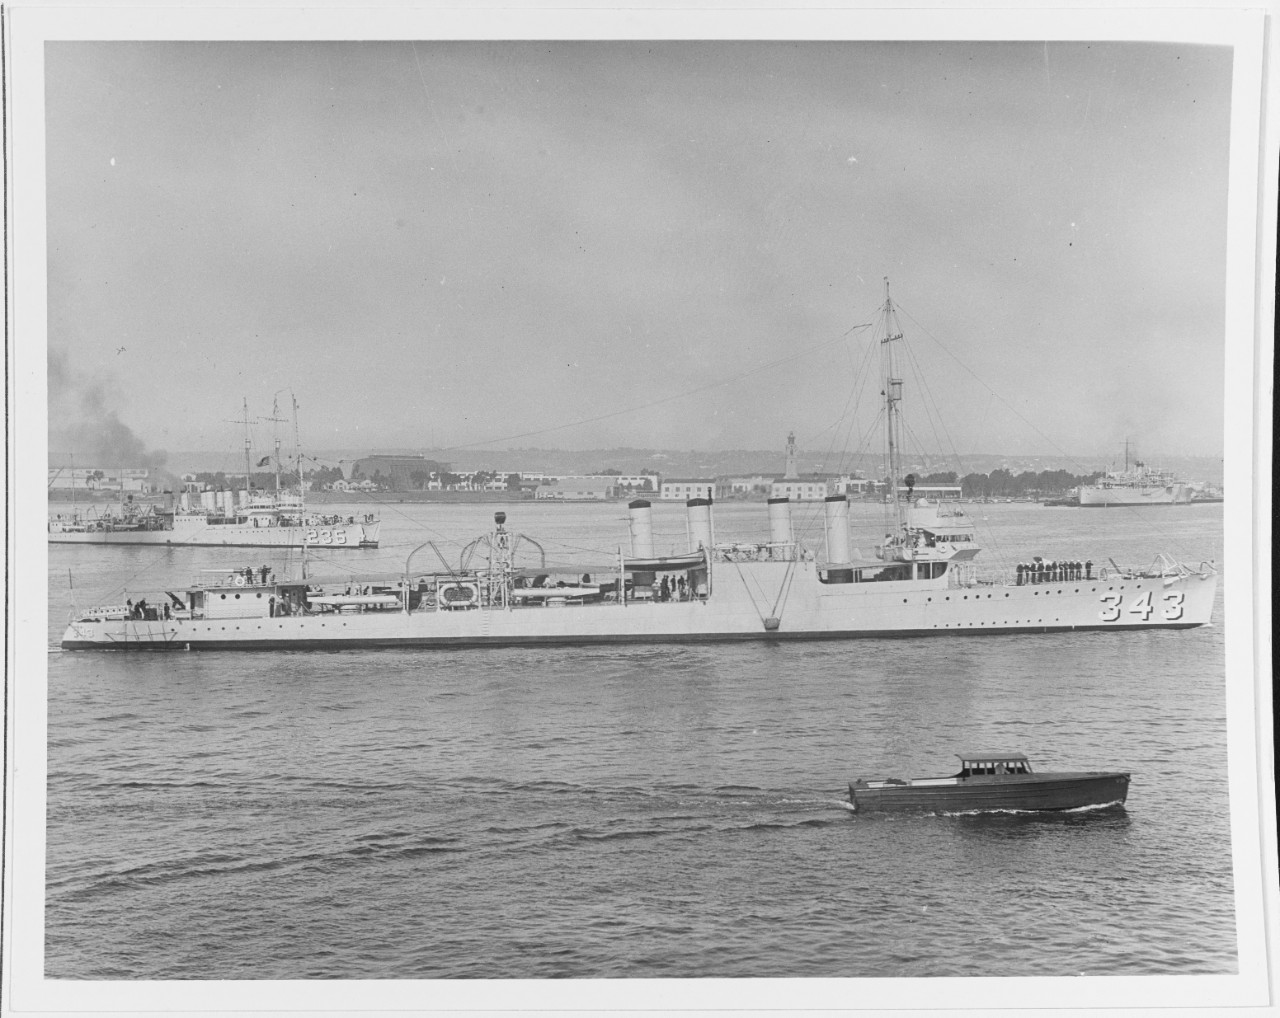 Clemson-class destroyer USS Noa (DD-343) underway in San Diego Harbor, about 1930. Note yacht underway in the foreground, and USS Kane (DD-235) moored alongside another destroyer in the background. Other vessels can be seen in the distant background, as well as a far-off airship hangar.